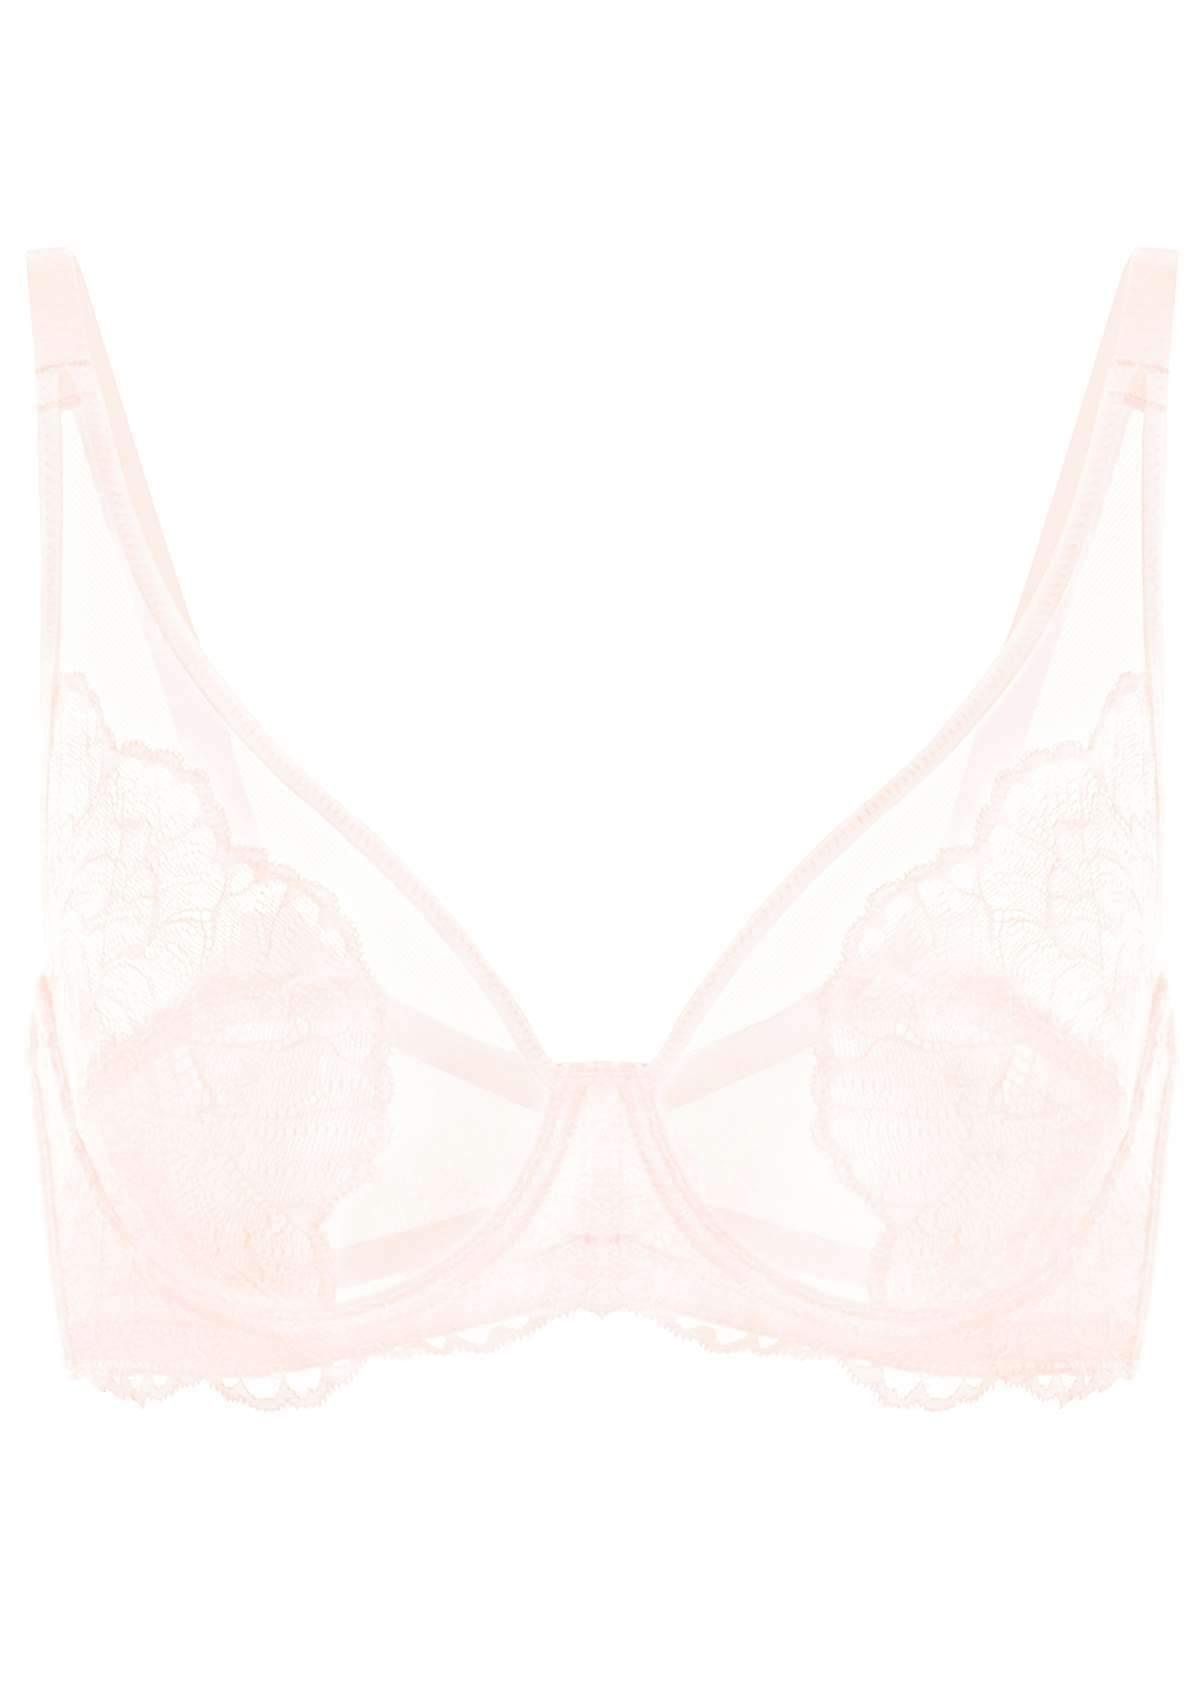 HSIA Blossom Sheer Lace Bra: Comfortable Underwire Bra For Big Busts - White / 42 / H